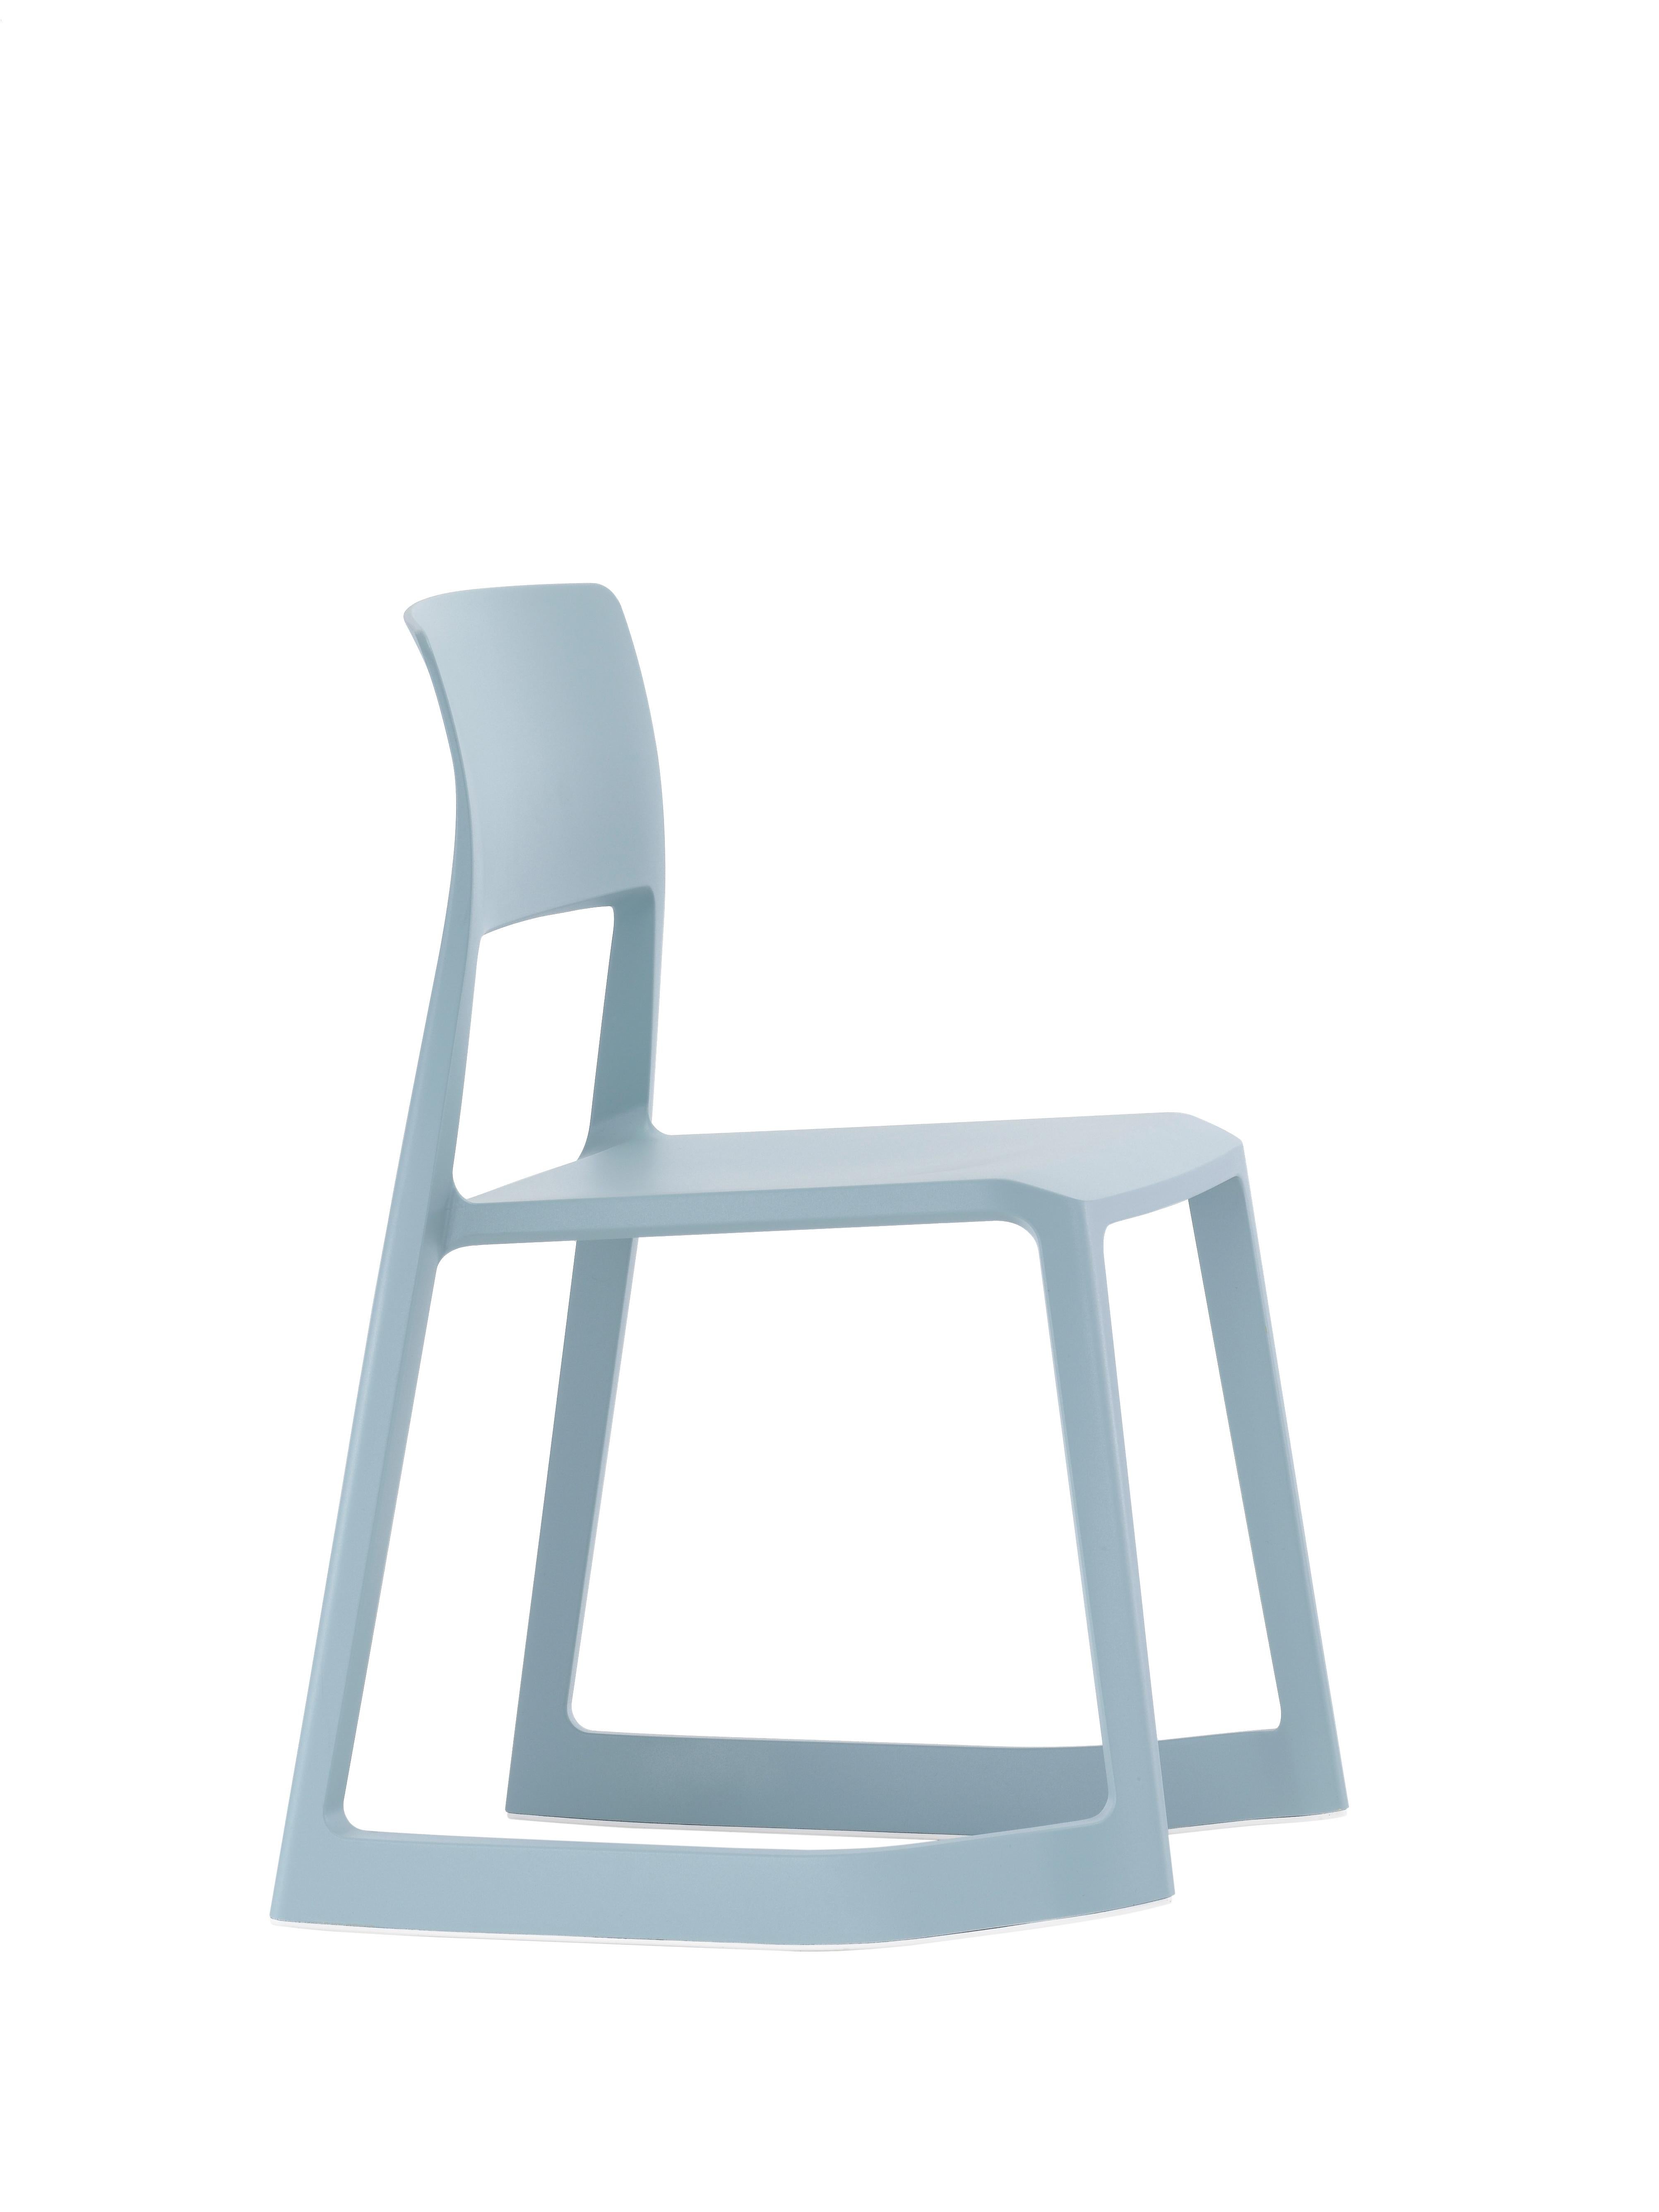 Swiss Vitra Tip Ton Chair in Ice Gray Edward Barber & Jay Osgerby For Sale